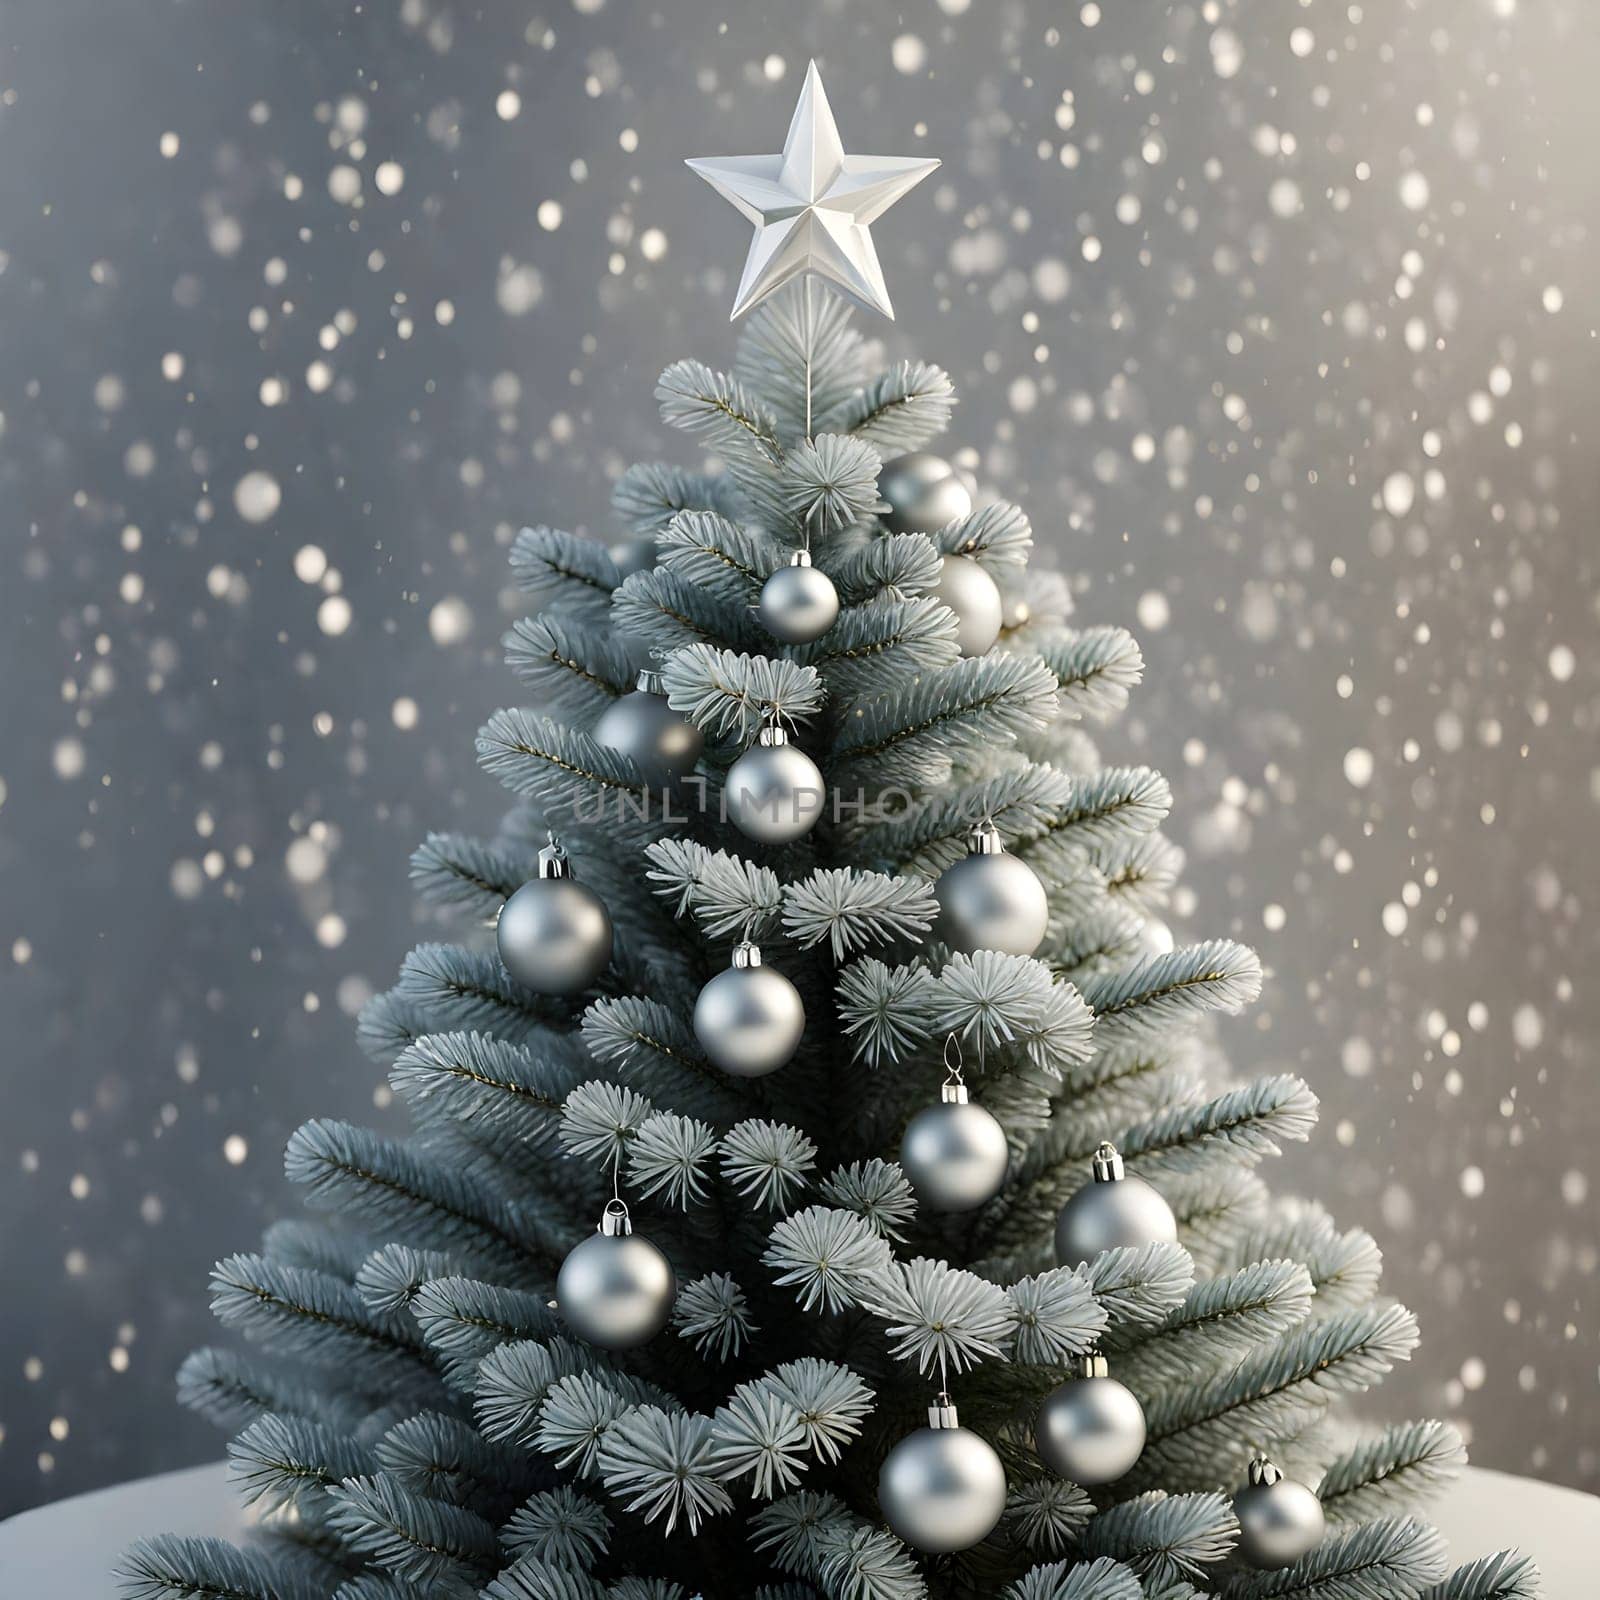 Christmas tree with silver balls, stars and snowflakes on gray background by LanaLeta